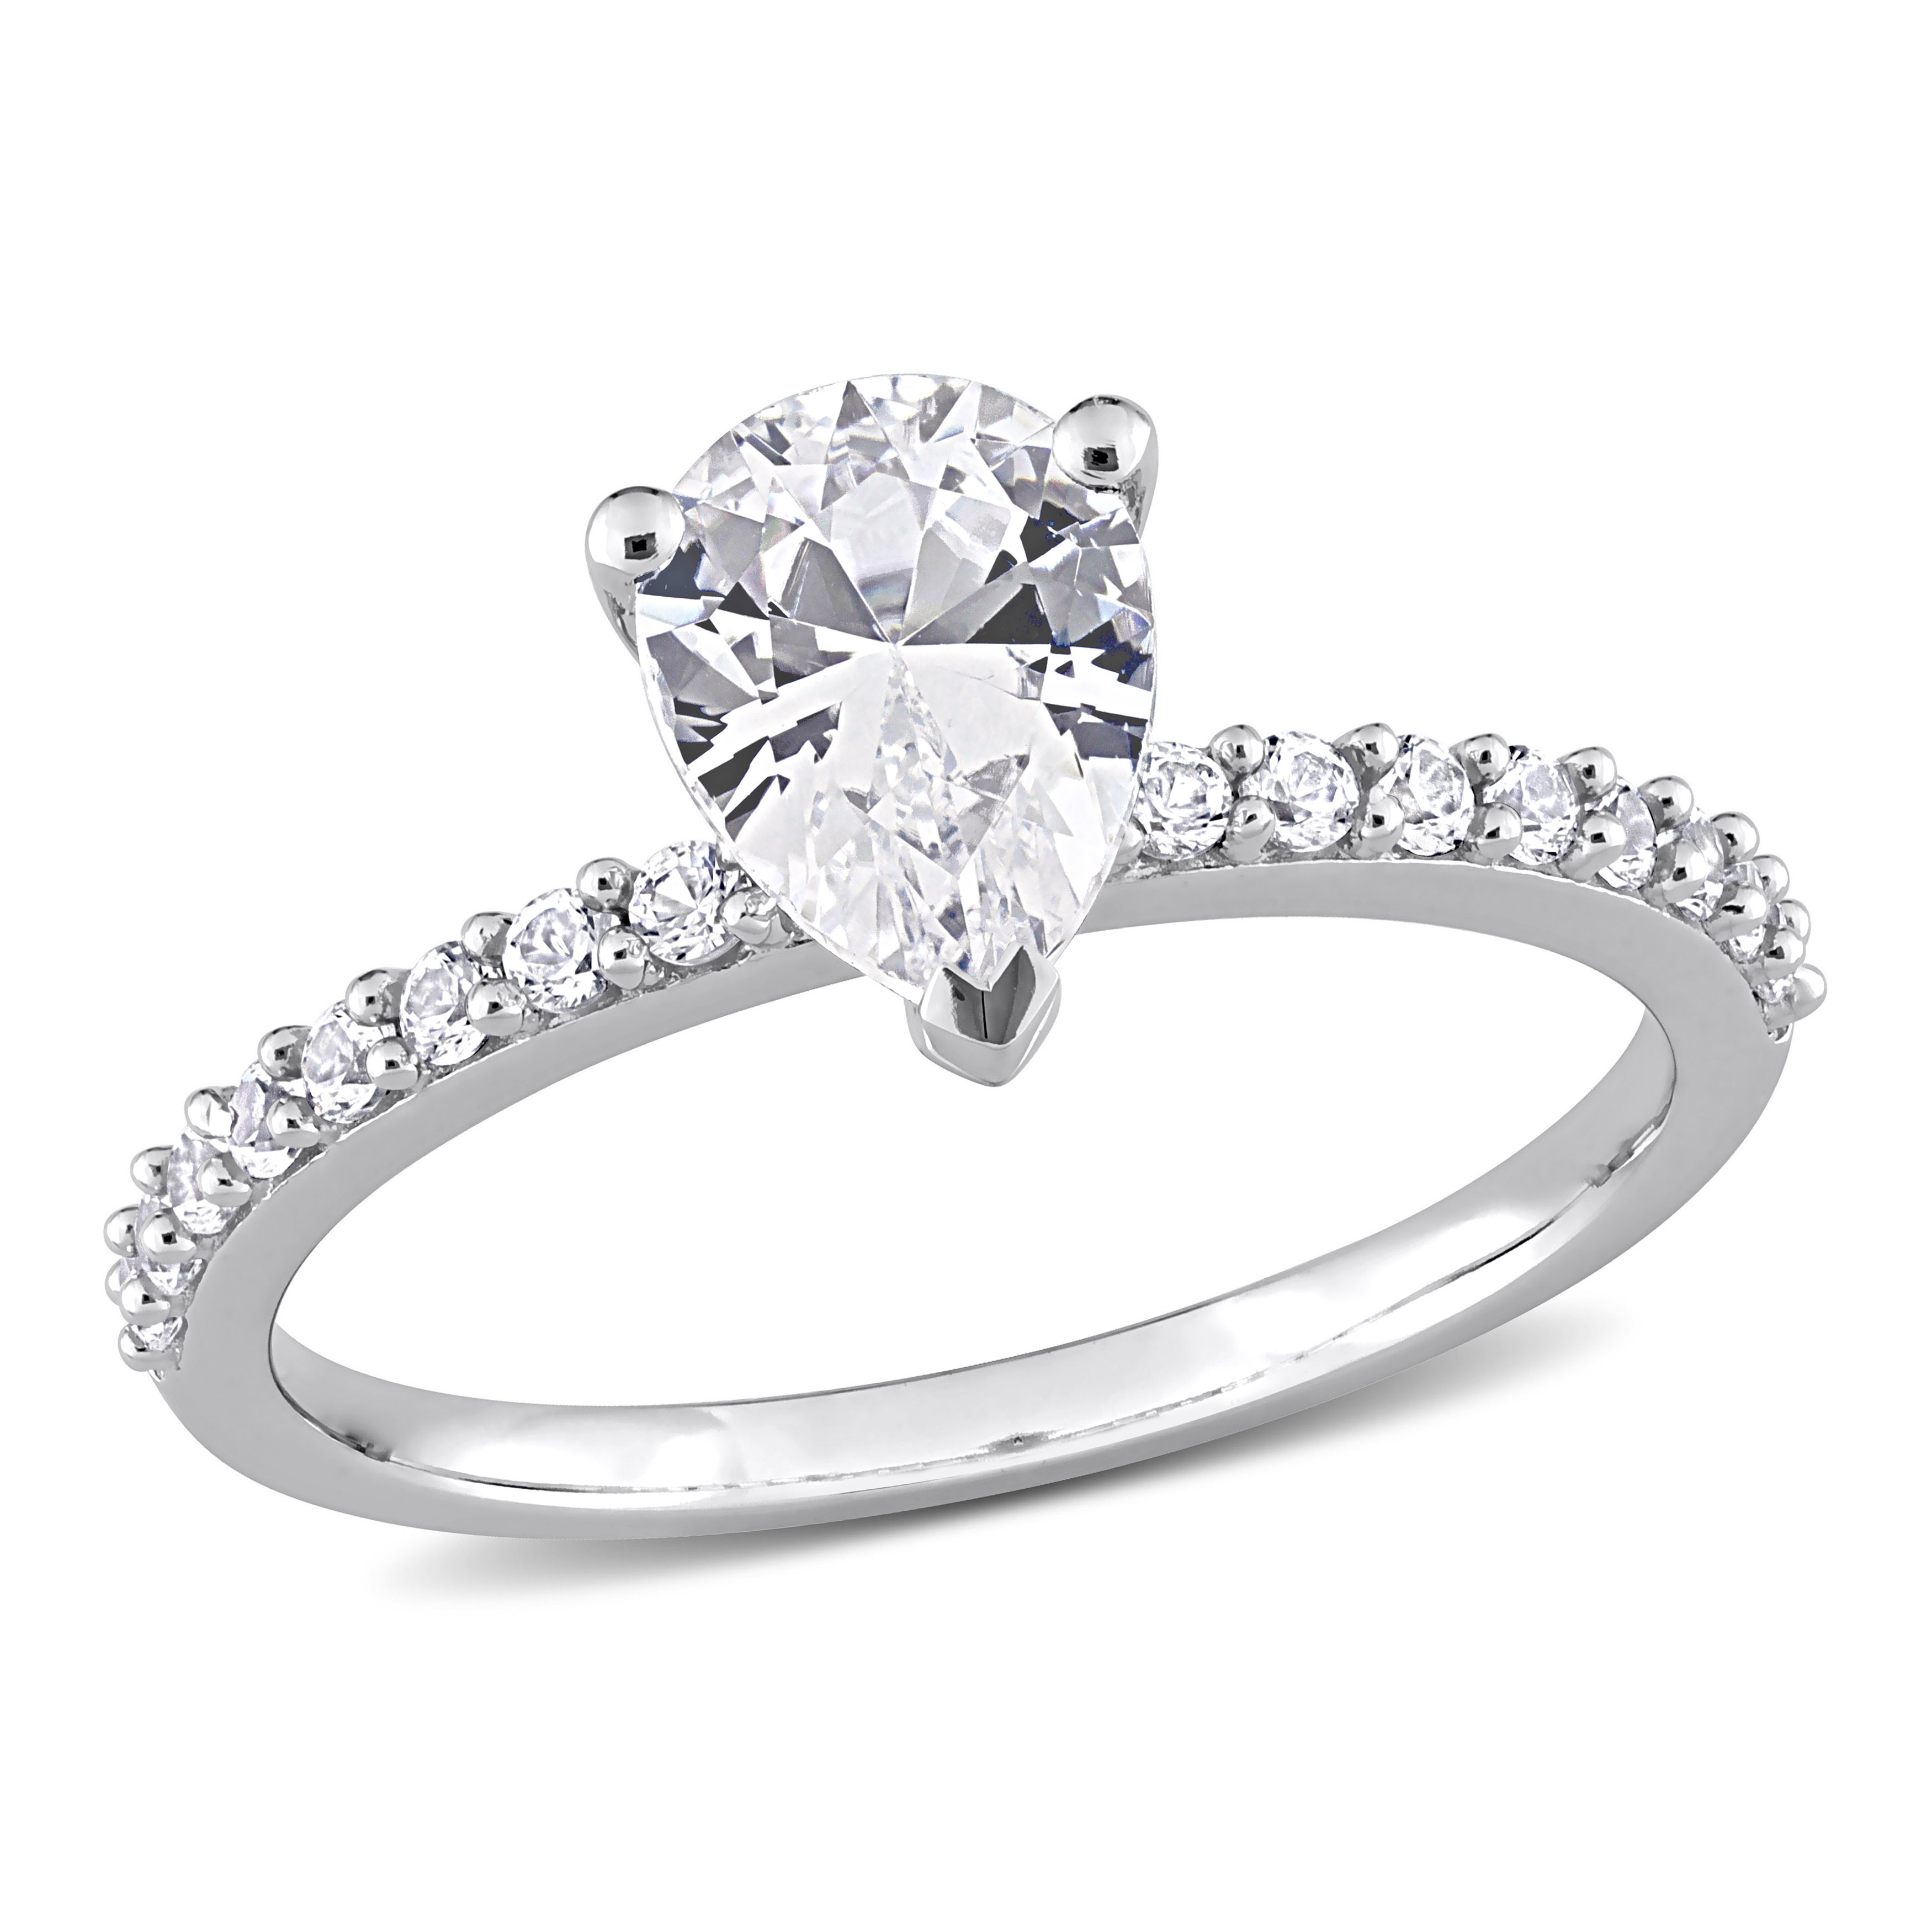 2 1/8 CT TGW Pear Shape Created White Sapphire Solitaire Engagement Ring in 10k White Gold